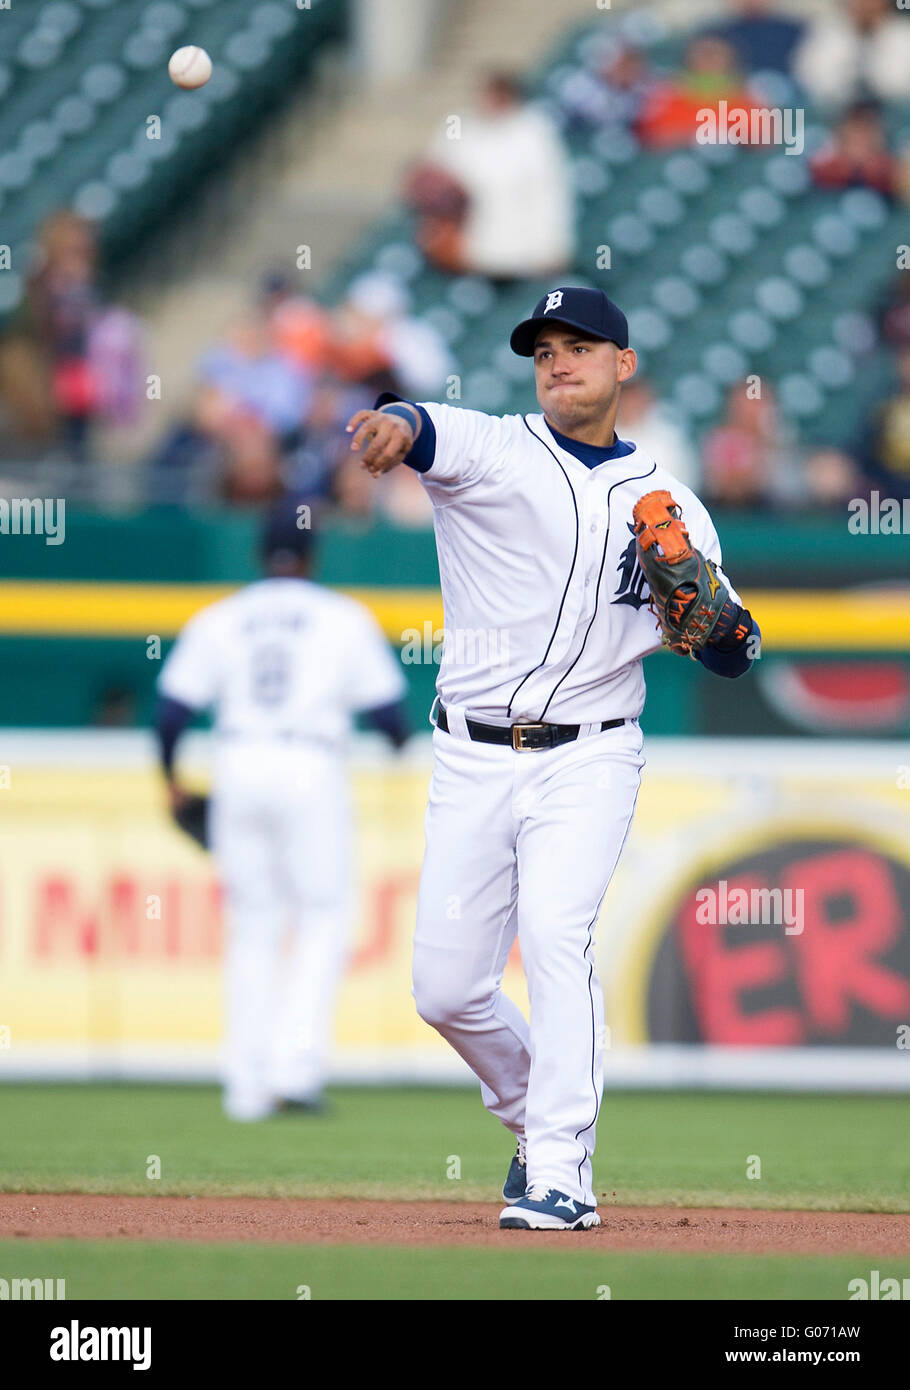 Detroit, Michigan, USA. 27th Apr, 2016. Detroit Tigers shortstop Jose Iglesias (1) throws the ball to first base during MLB game action between the Oakland Athletics and the Detroit Tigers at Comerica Park in Detroit, Michigan. The Tigers defeated the Athletics 9-4. John Mersits/CSM/Alamy Live News Stock Photo